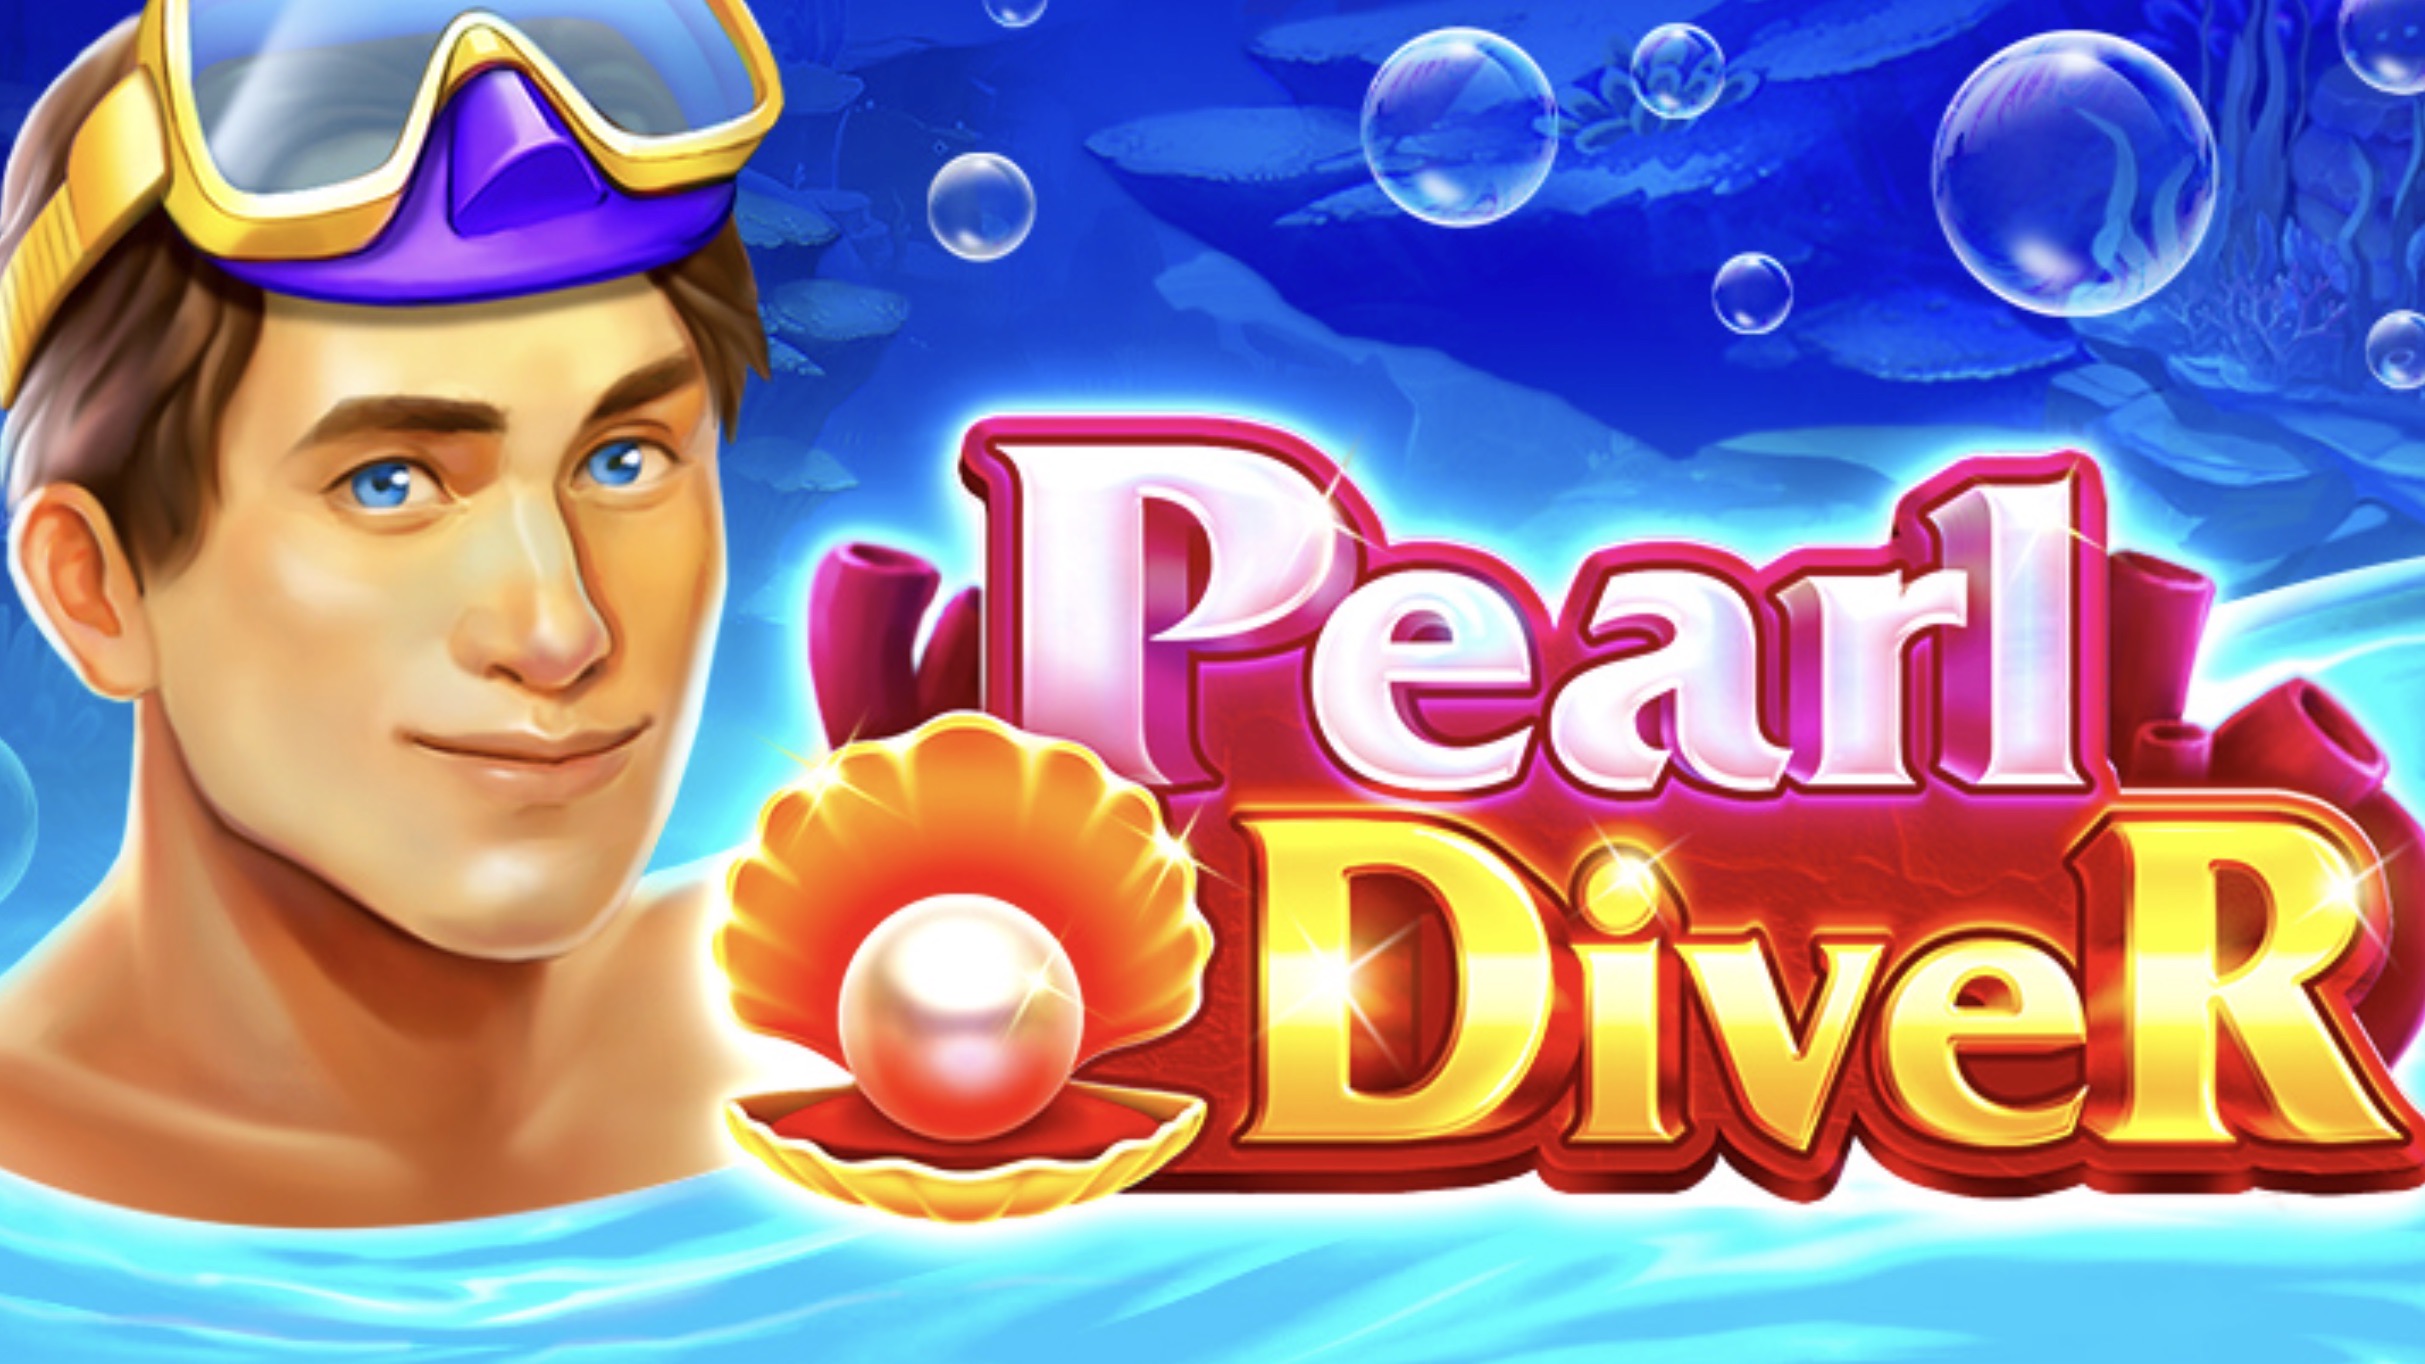 Pearl Diver is a 5x3, 10-payline video slot with features including free spins, a diver feature and a wild and scatter symbol.